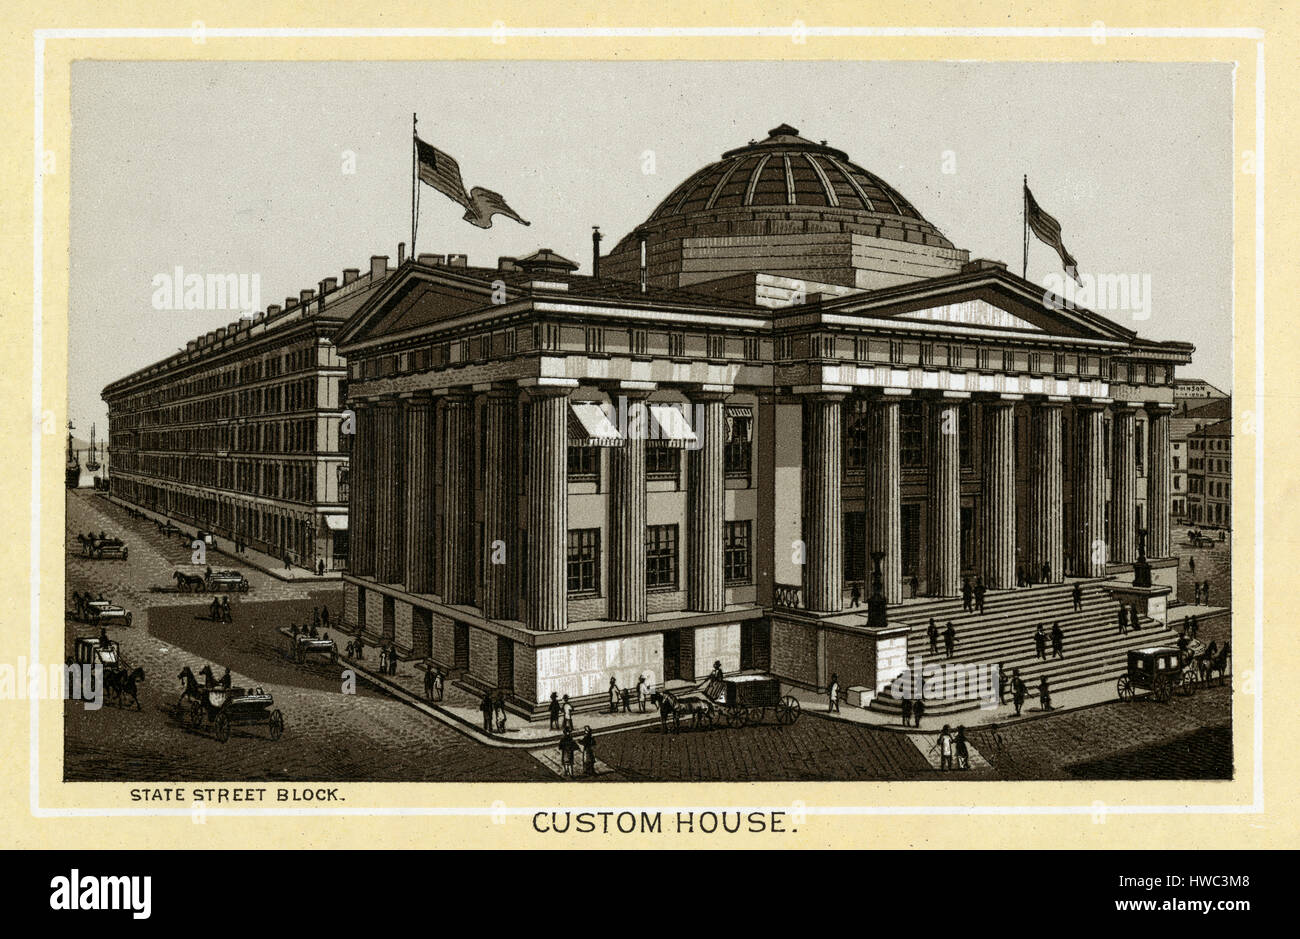 Antique 1883 monochromatic print from a souvenir album, showing the Custom House on India Street and State Street in Boston, Massachusetts. Printed with the Glaser/Frey lithographic process, a multi-stone lithographic process developed in Germany. Stock Photo